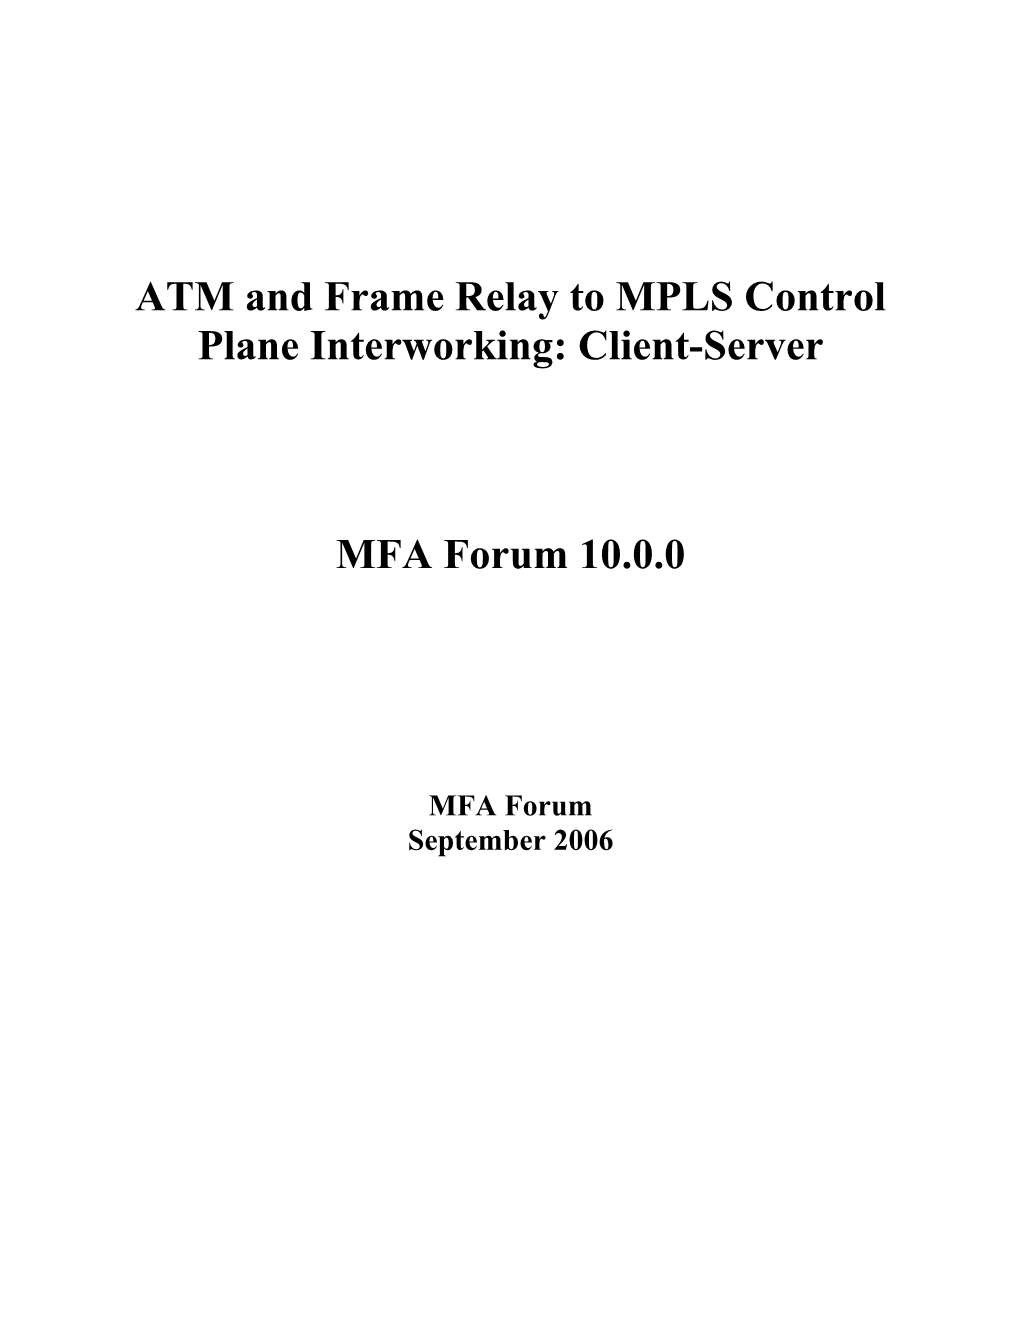 ATM and Frame Relay to MPLS Control Plane Interworking Straw